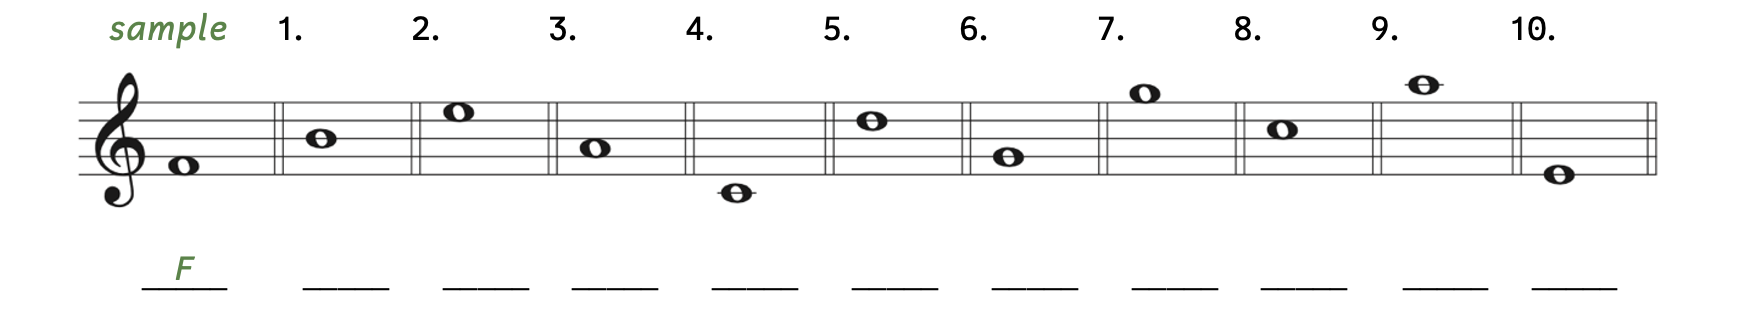 An exercise that asks you to identify pitches on the staff with treble clef. The sample has a whole note in the first space. The sample's answer is F. Number 1 is on the third line. Number 2 is in the fourth space. Number 3 is in the second space. Number 4 is on the ledger line below the staff. Number 5 is on the fourth line. Number 6 is on the second line. Number 7 is in the space above the staff. Number 8 is in the third space. Number 9 is on the ledger line above the staff. Number 10 is on the first line.